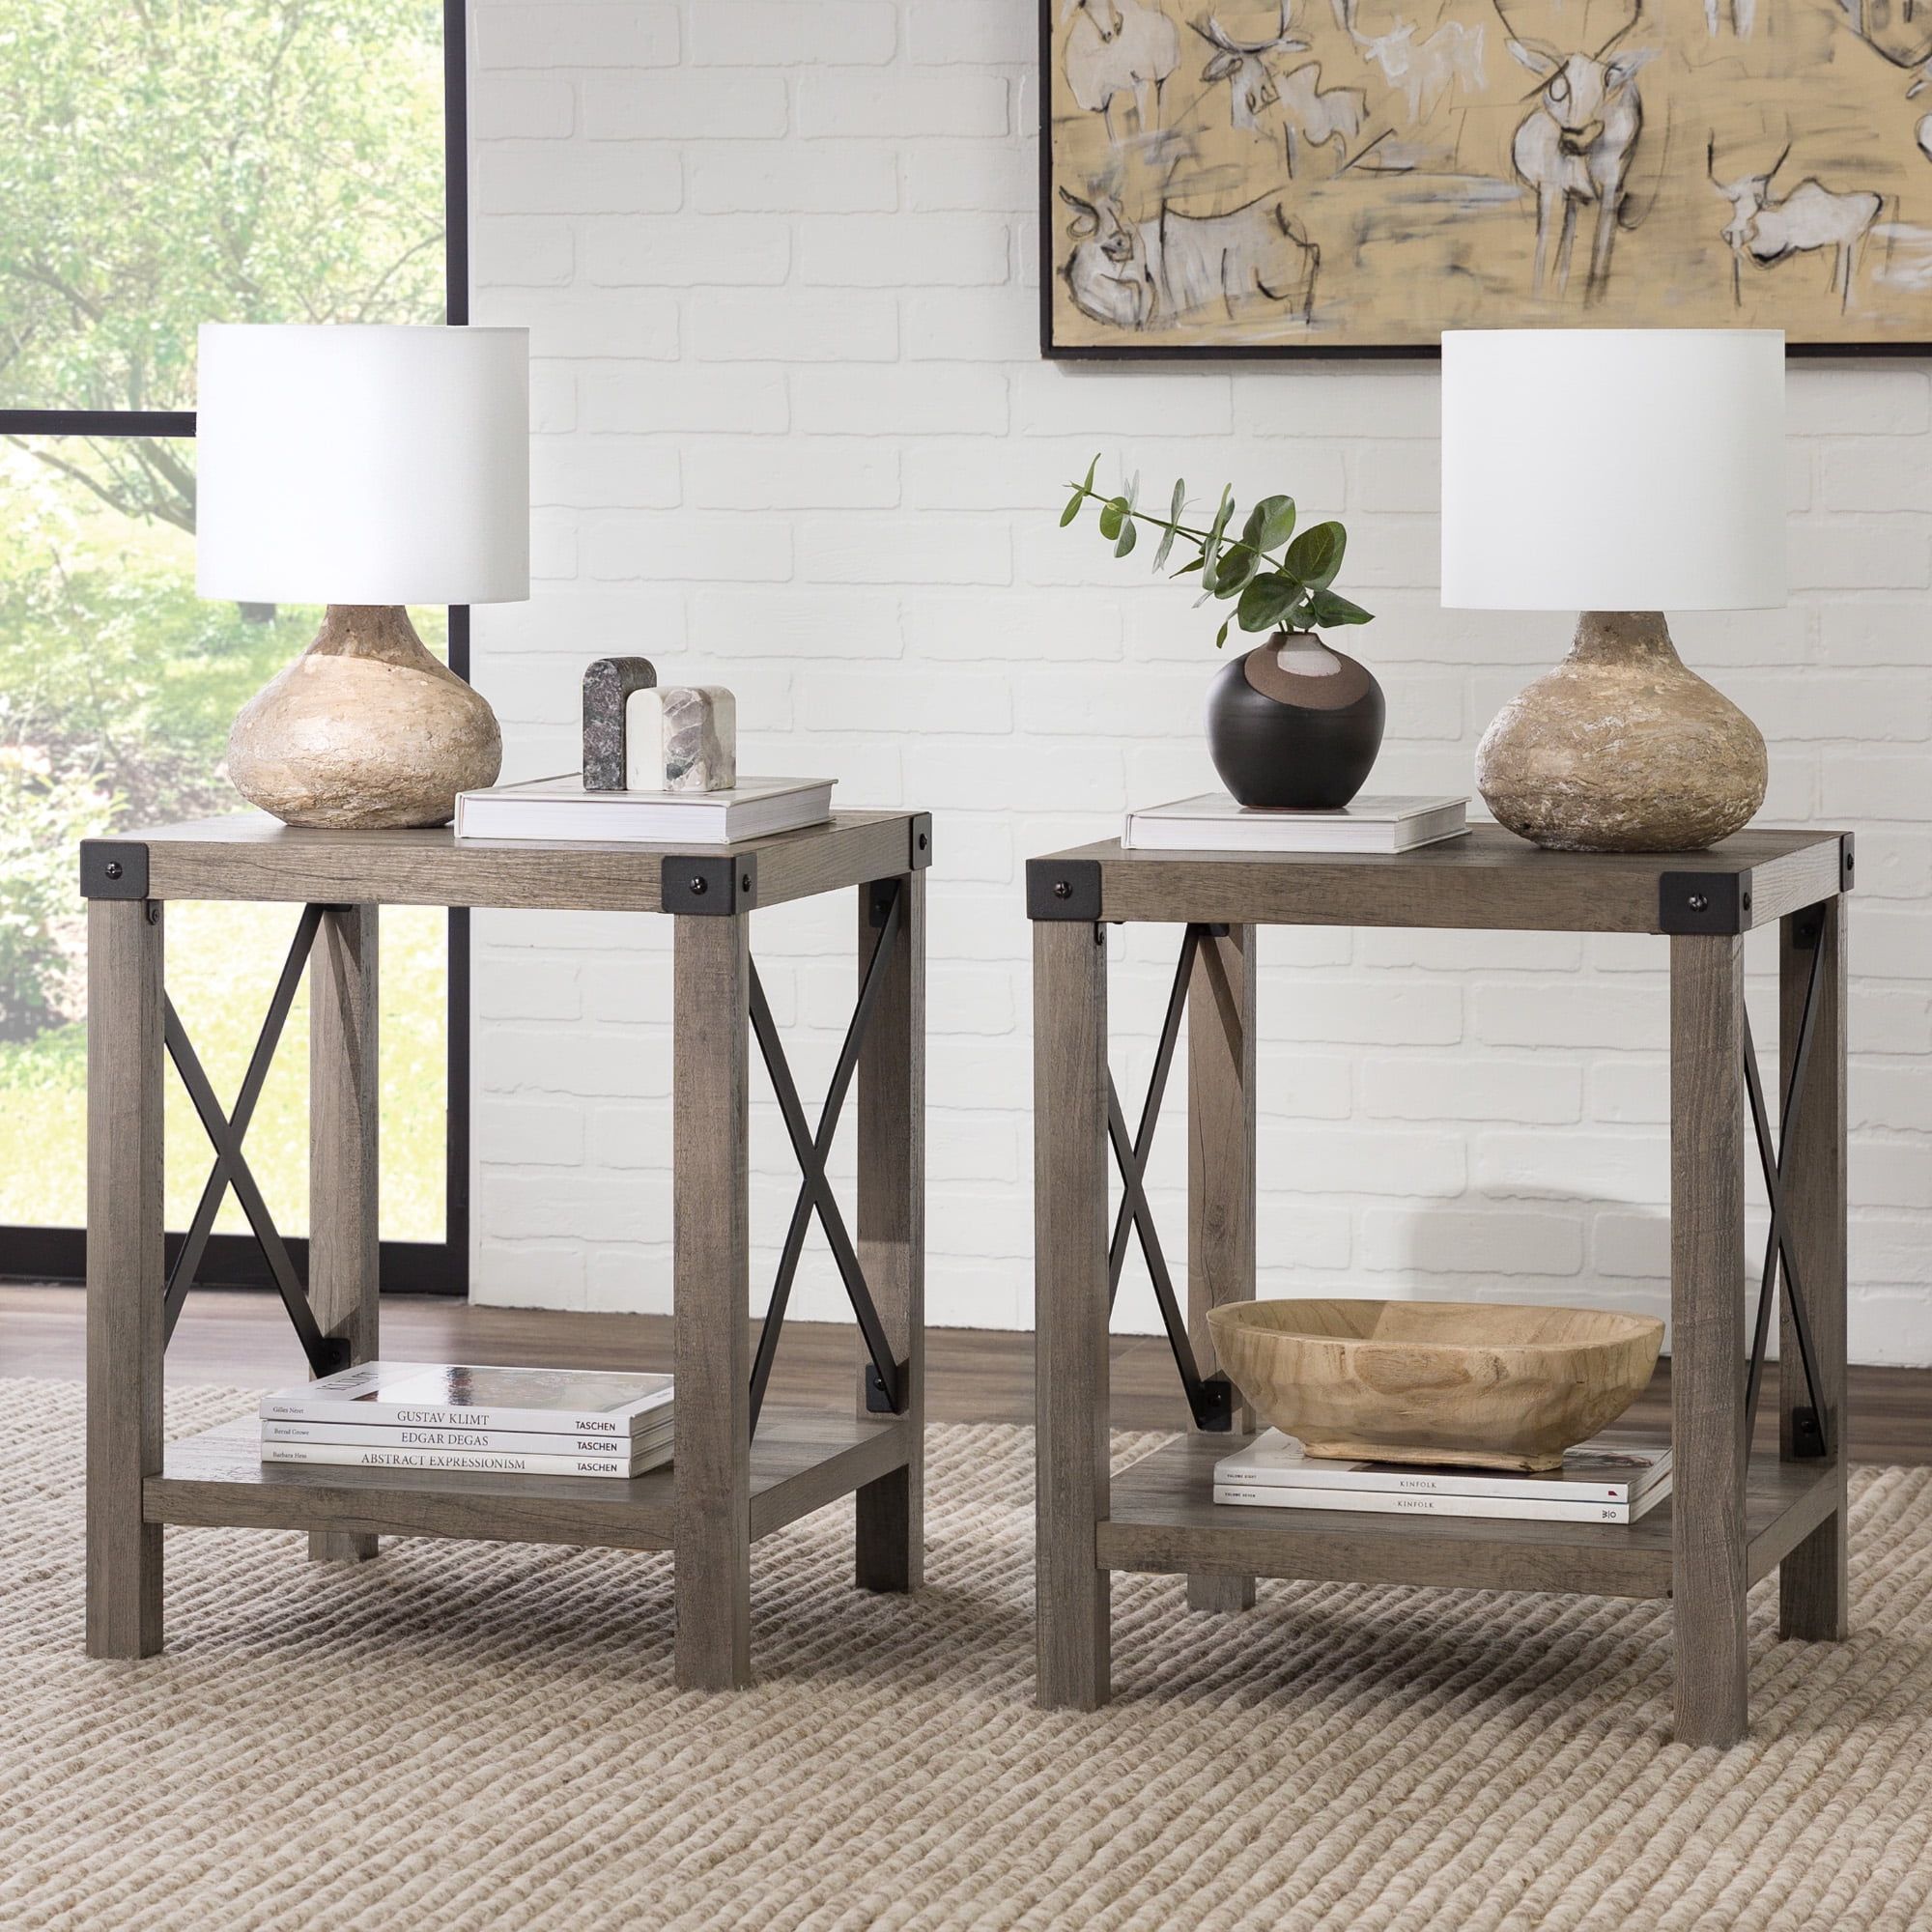 Woven Paths Magnolia Metal X Set Of 2 End Tables, Grey Wash – Walmart Intended For Rustic Gray End Tables (Photo 6 of 15)